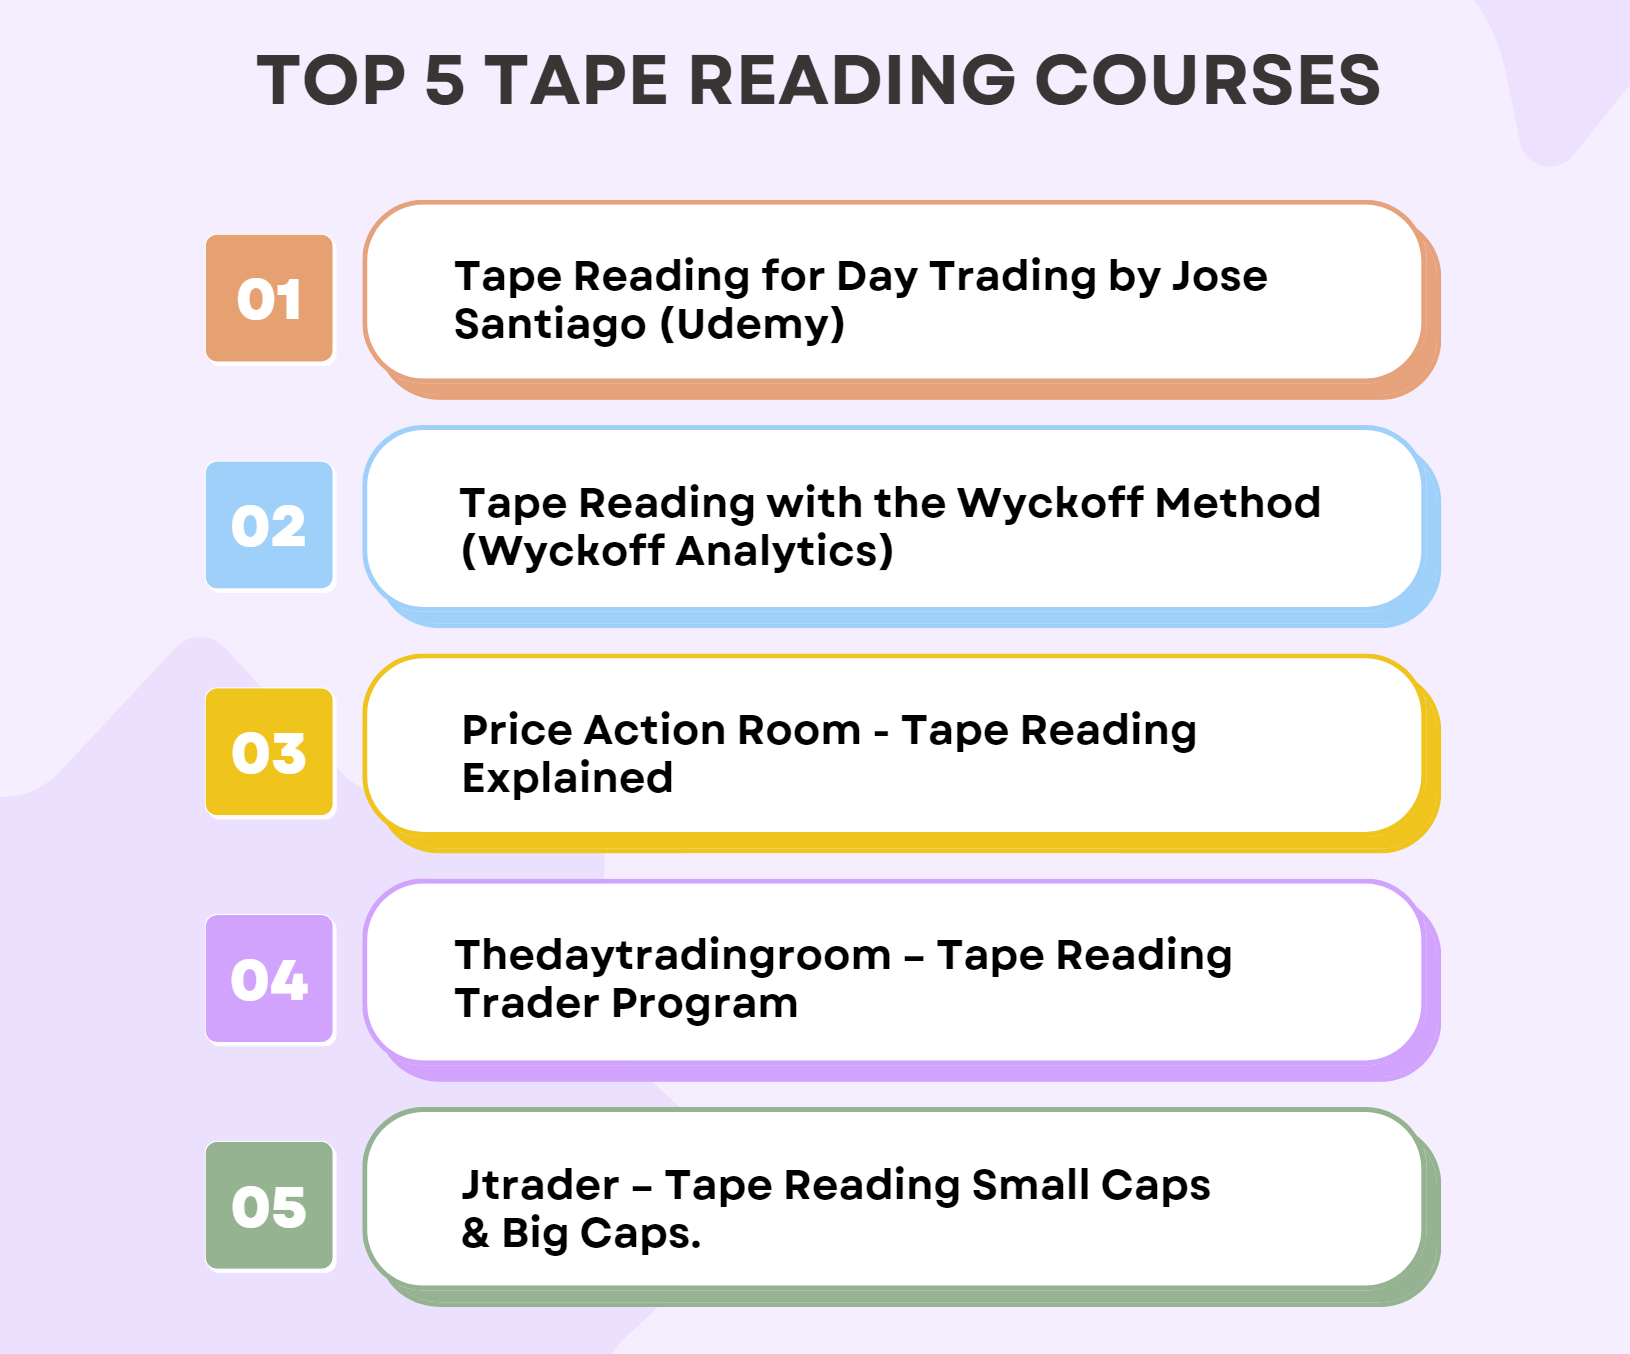 What Are The Top Tape Reading Courses For Traders